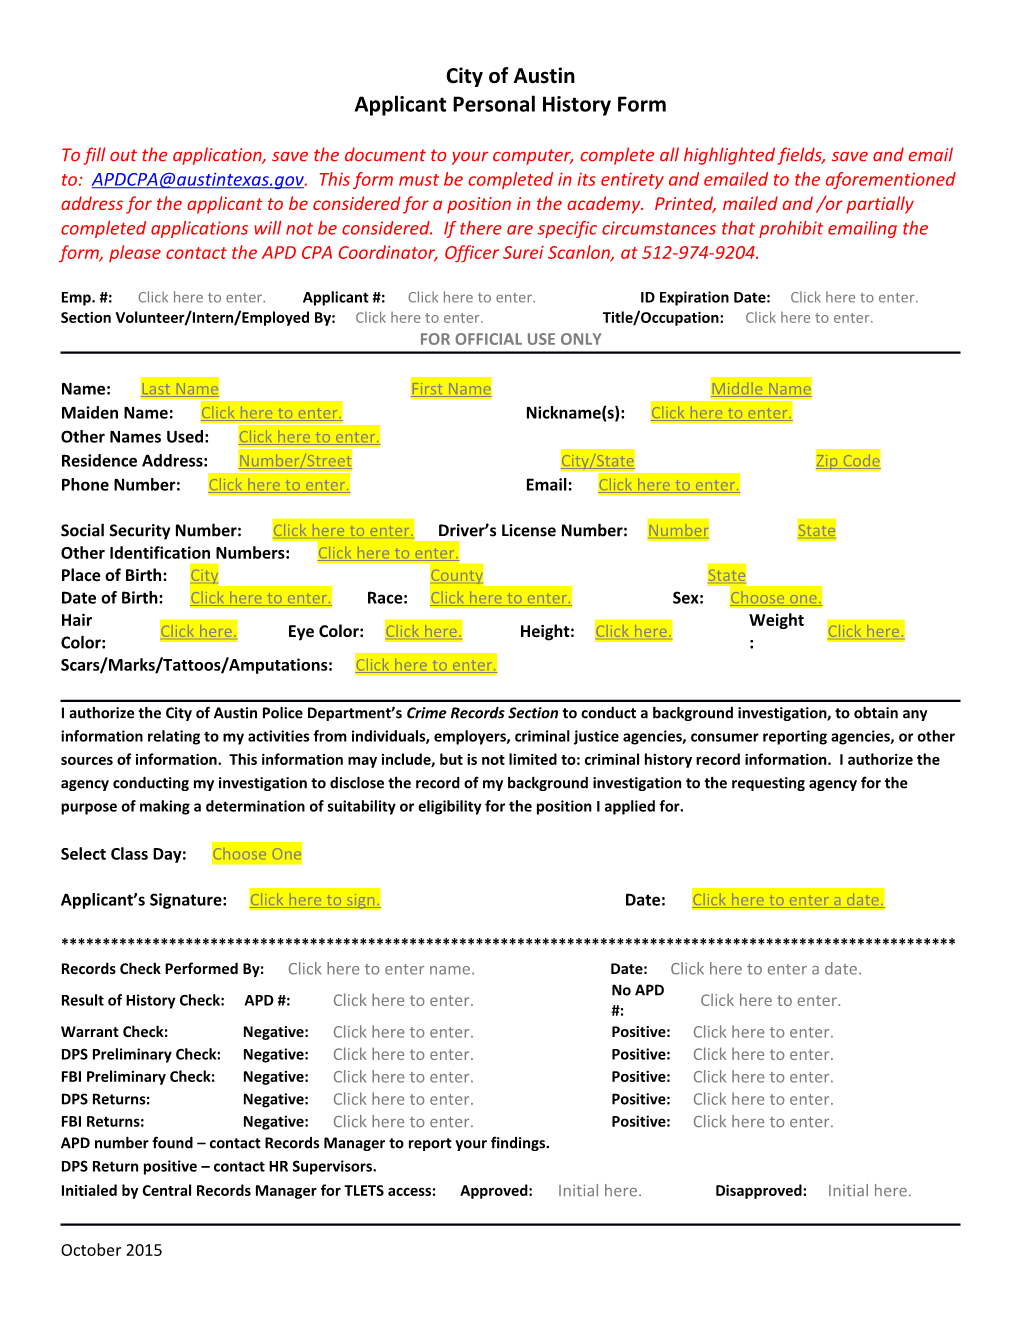 Applicant Personal History Form